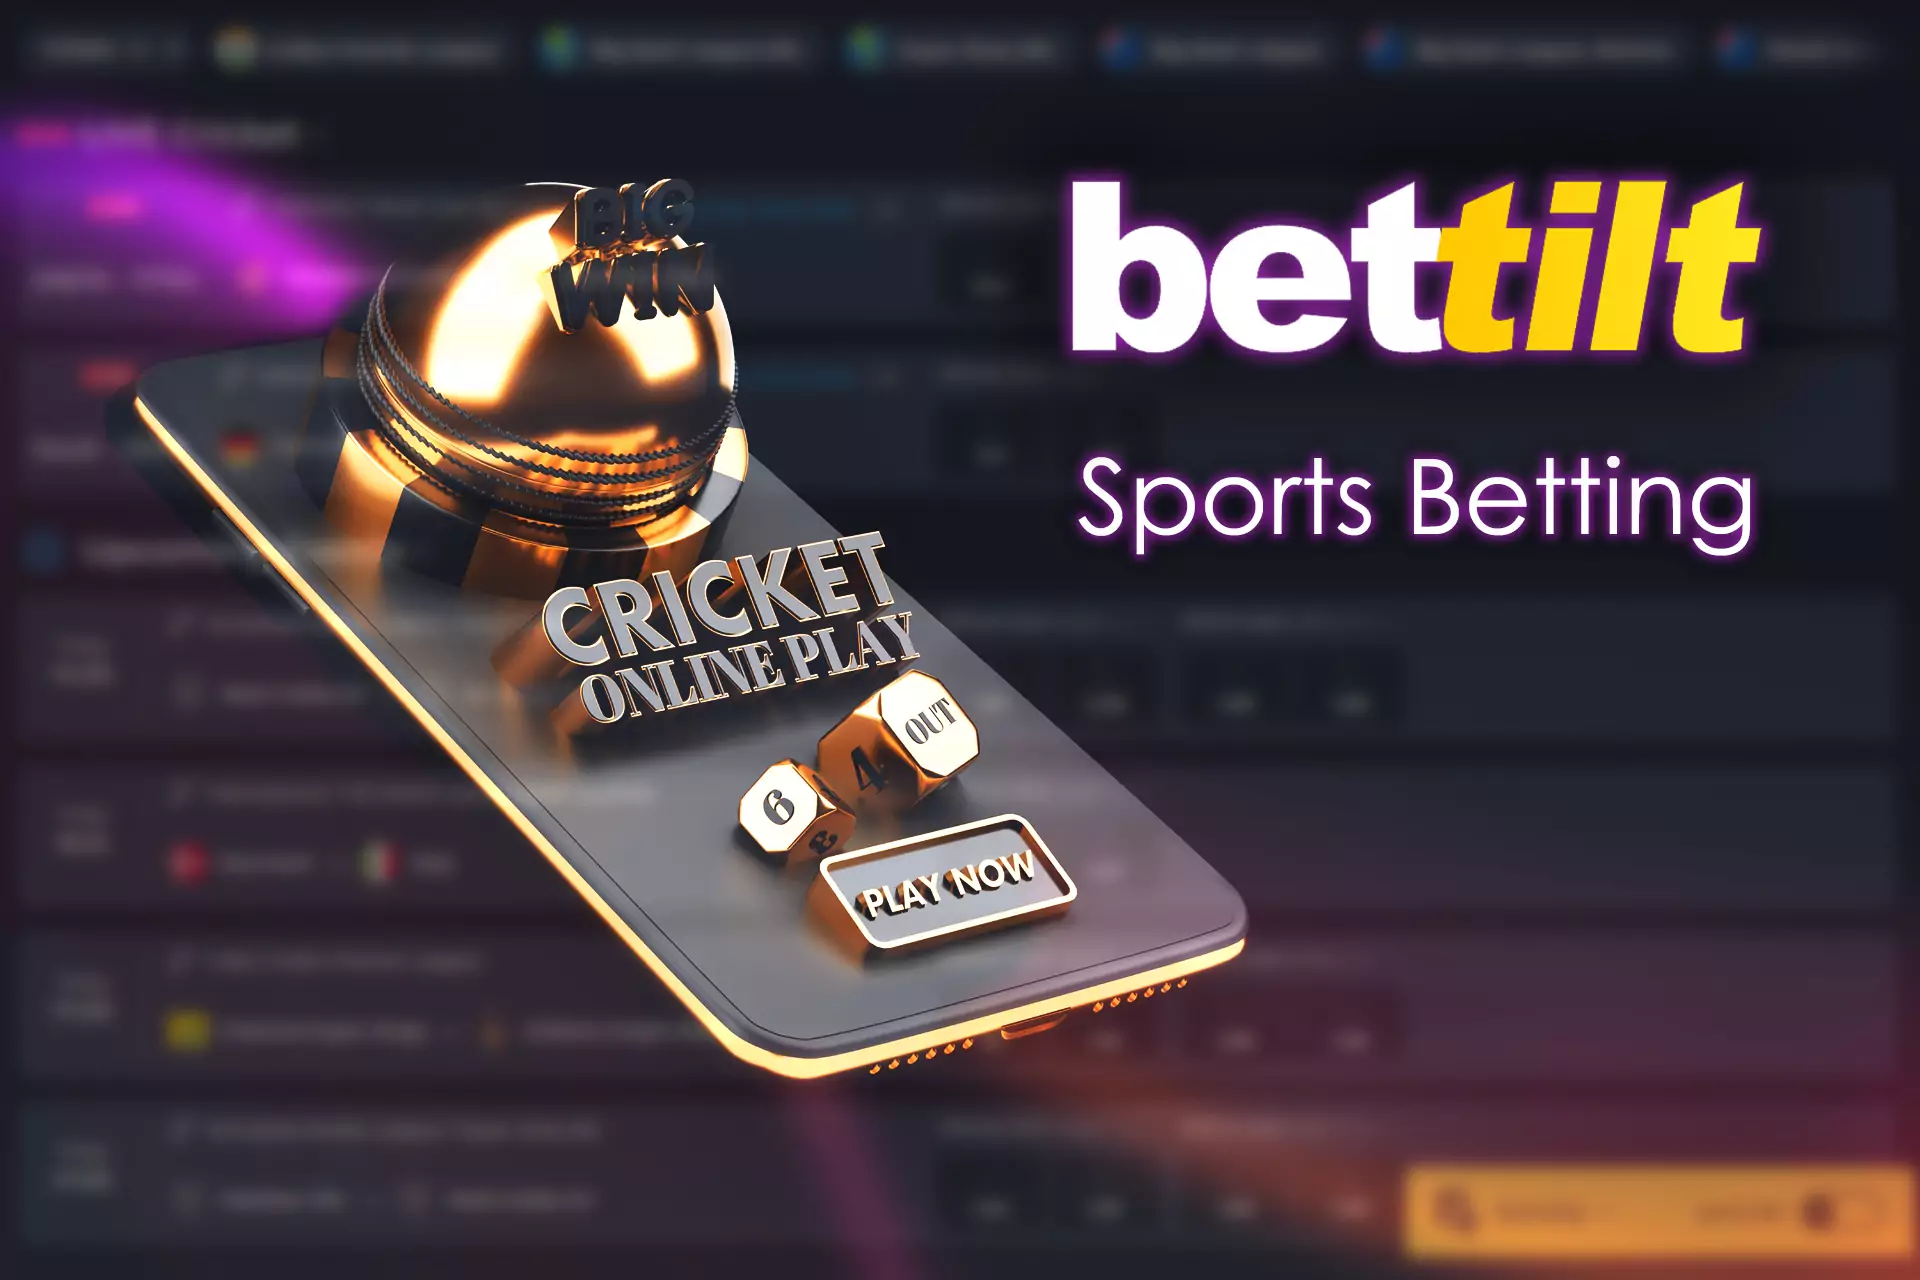 In the Sportsbook, you can place bets on all the most popular events.